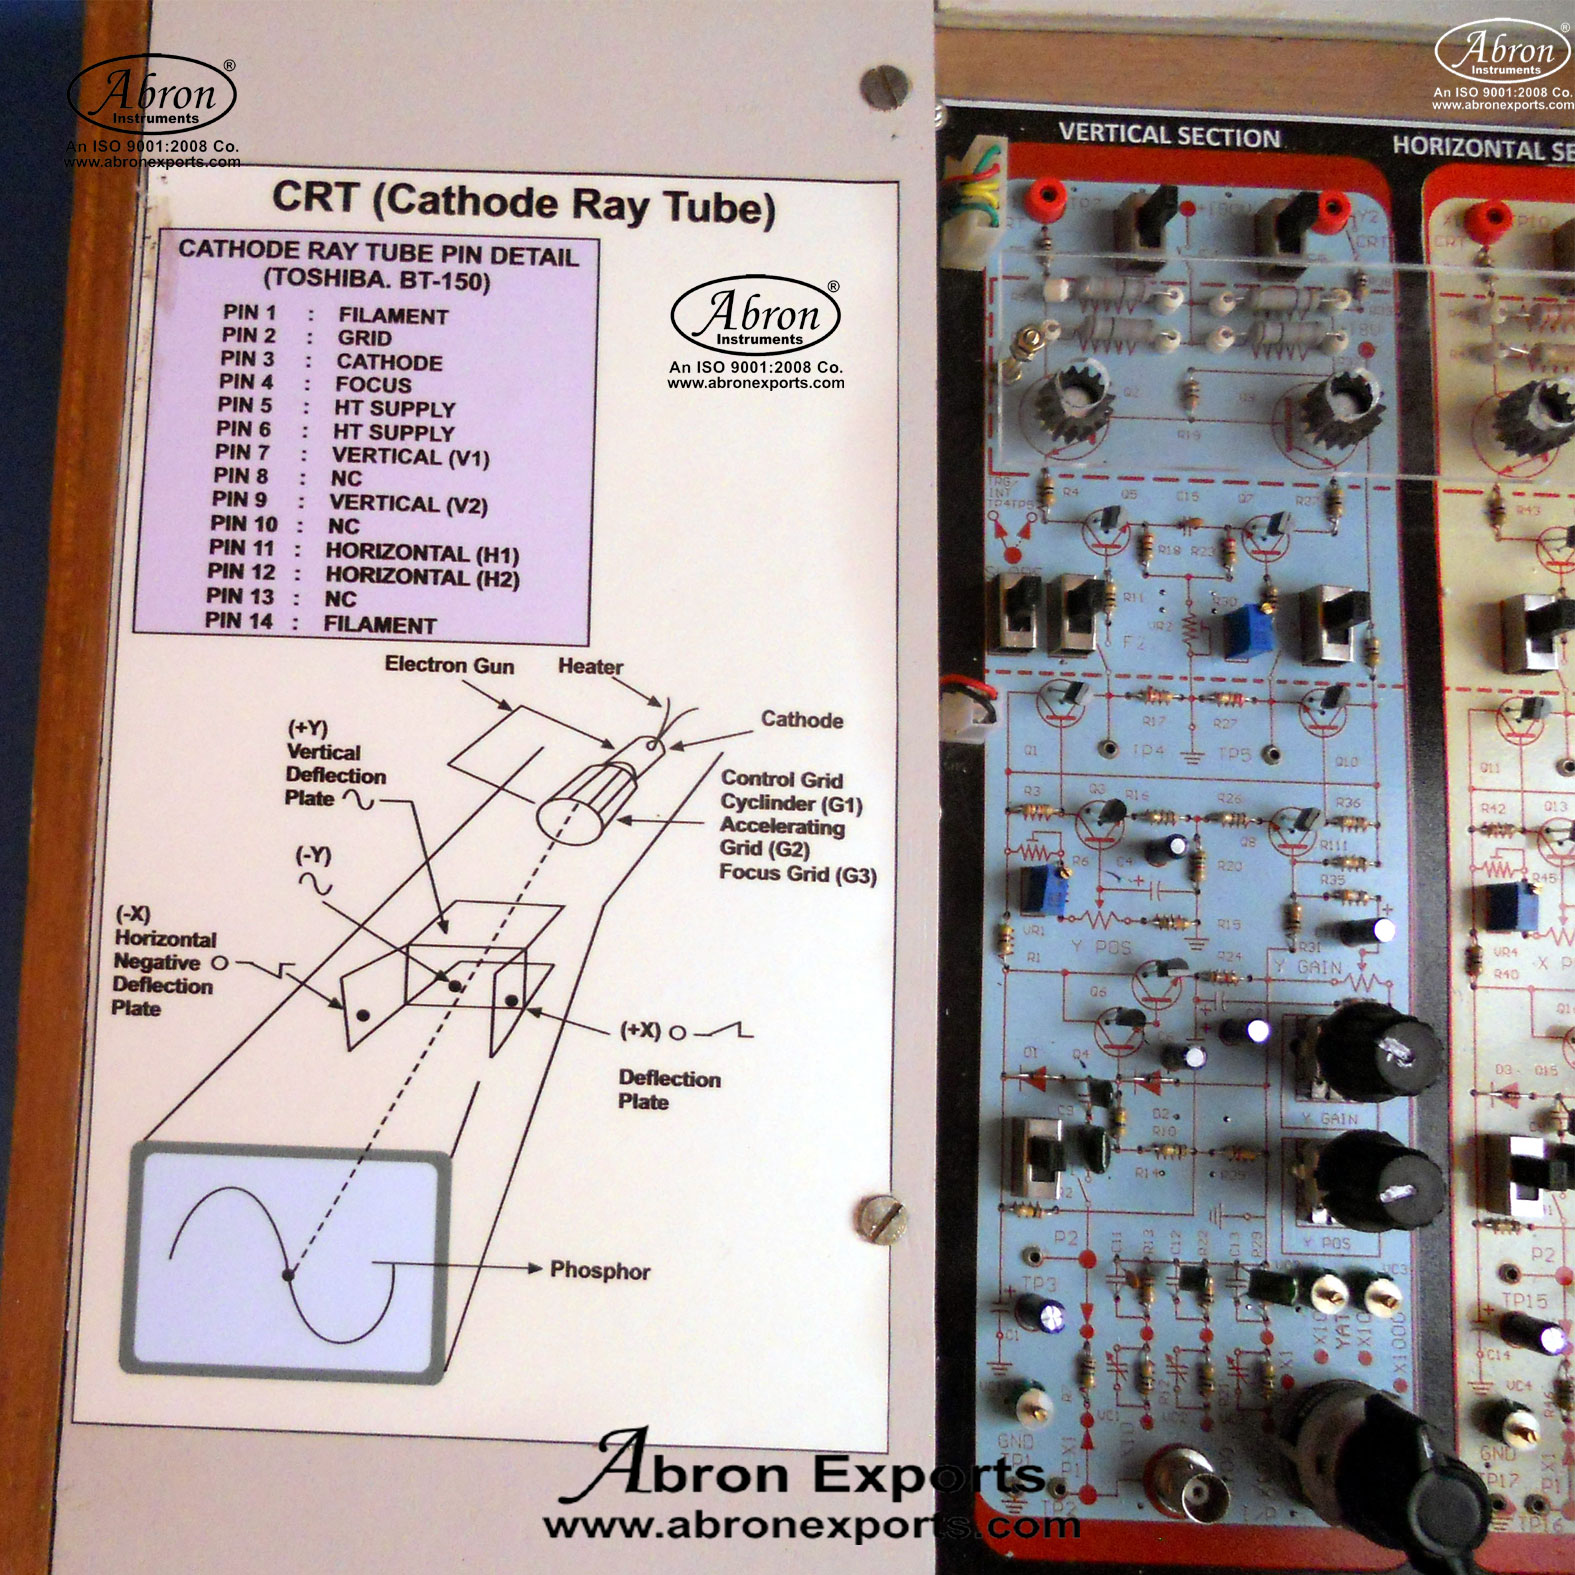 Cro demonstration trainer kit to study abron part AE-1426G